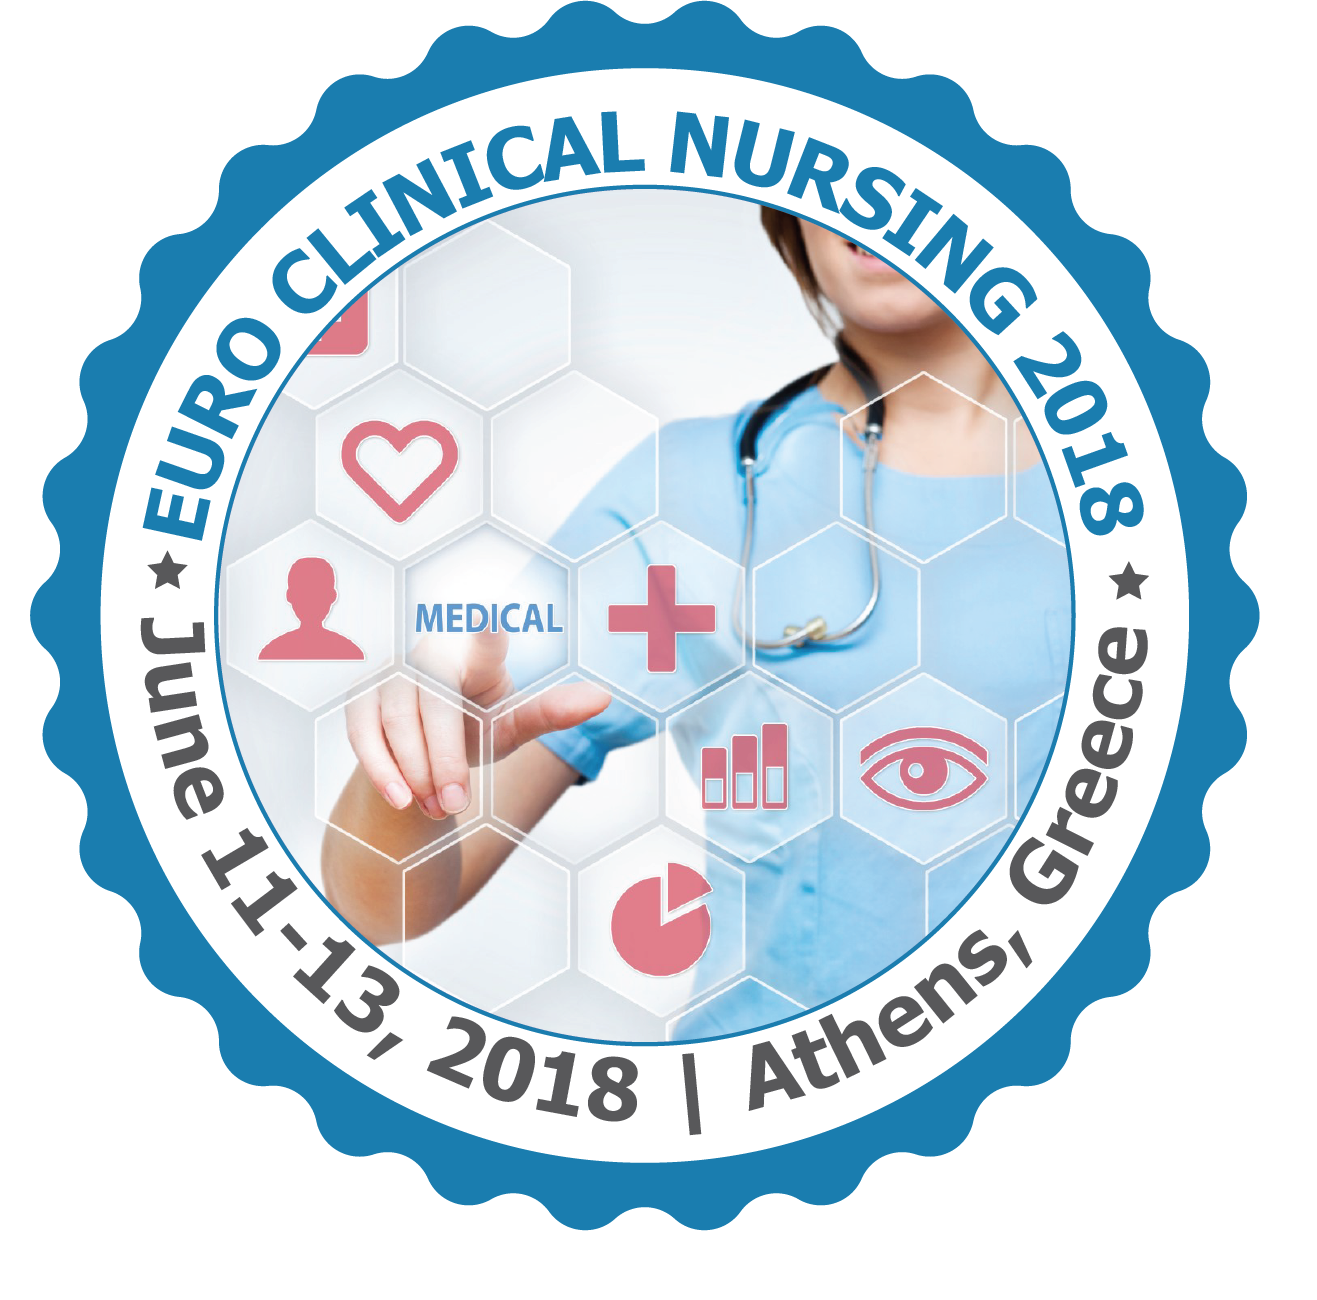 18th World Congress on Clinical Nursing and Practice